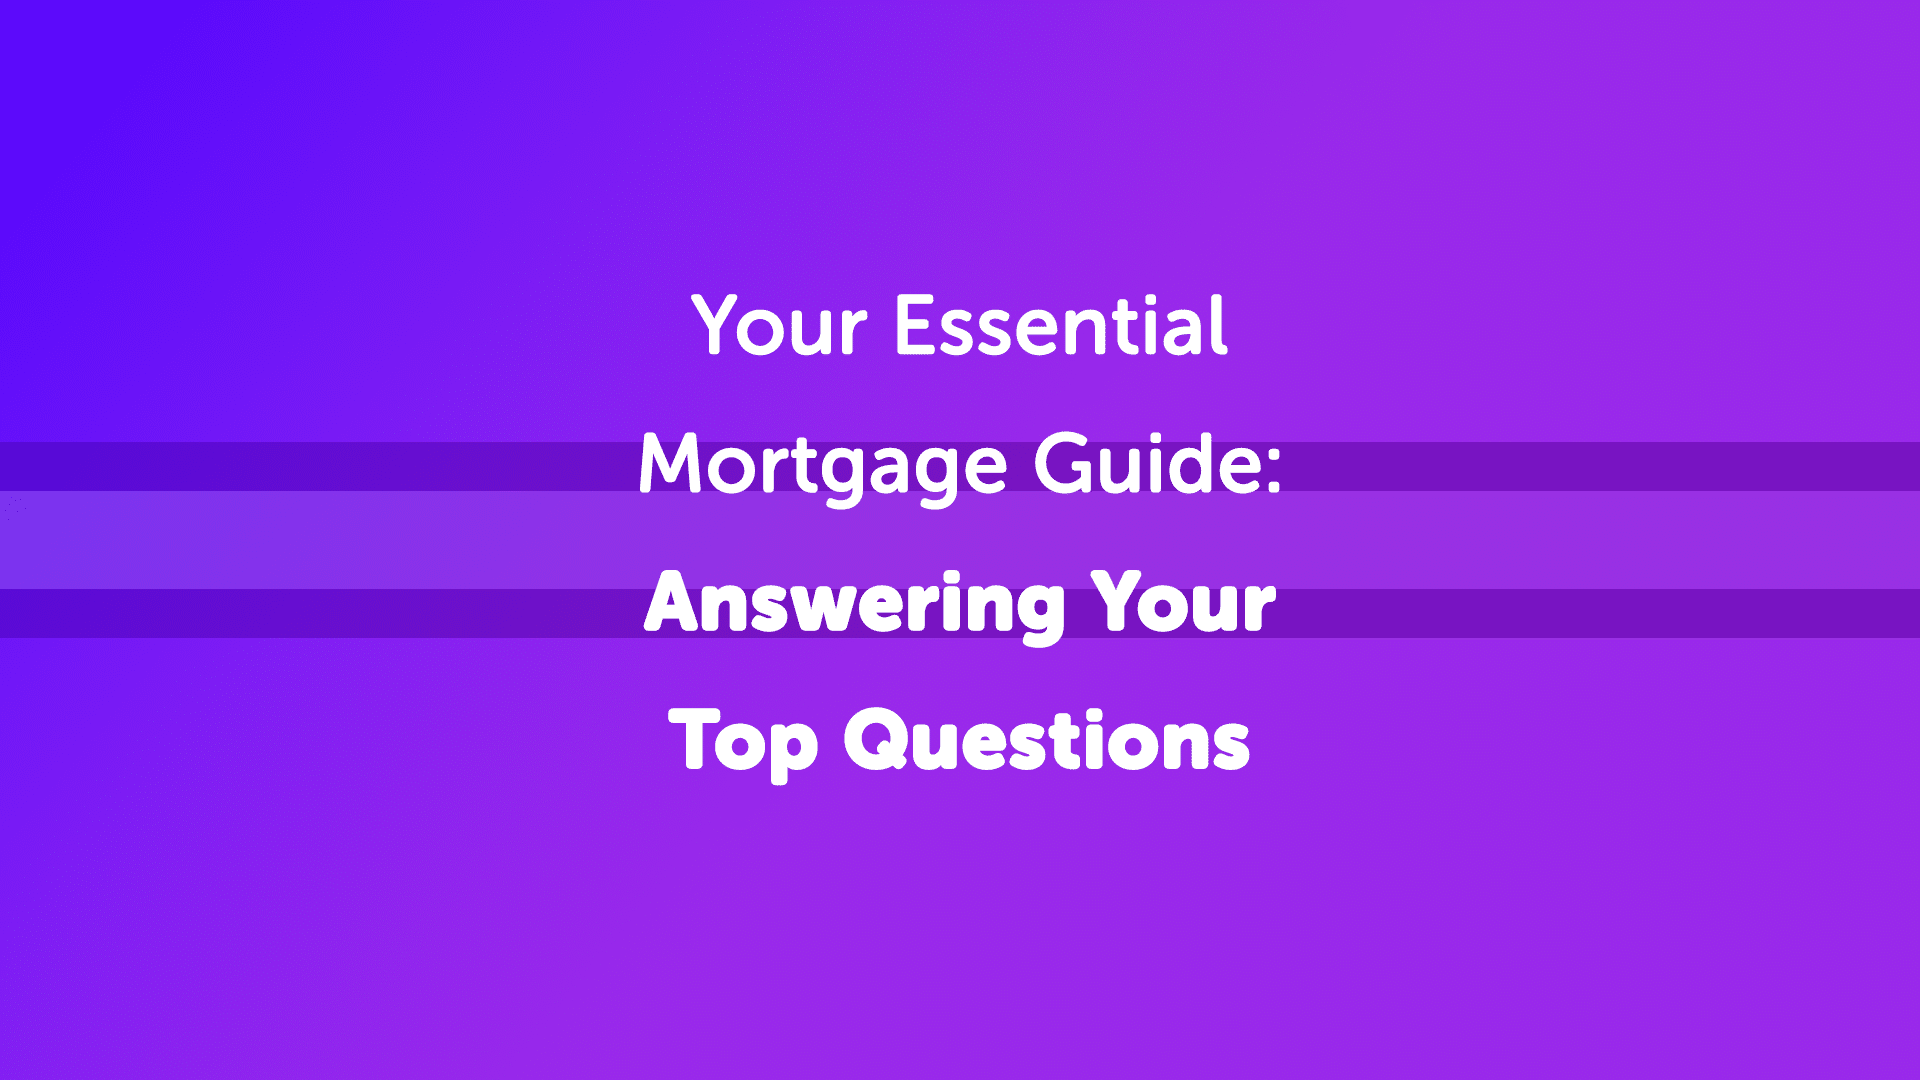 Your Essential Guide to Mortgages